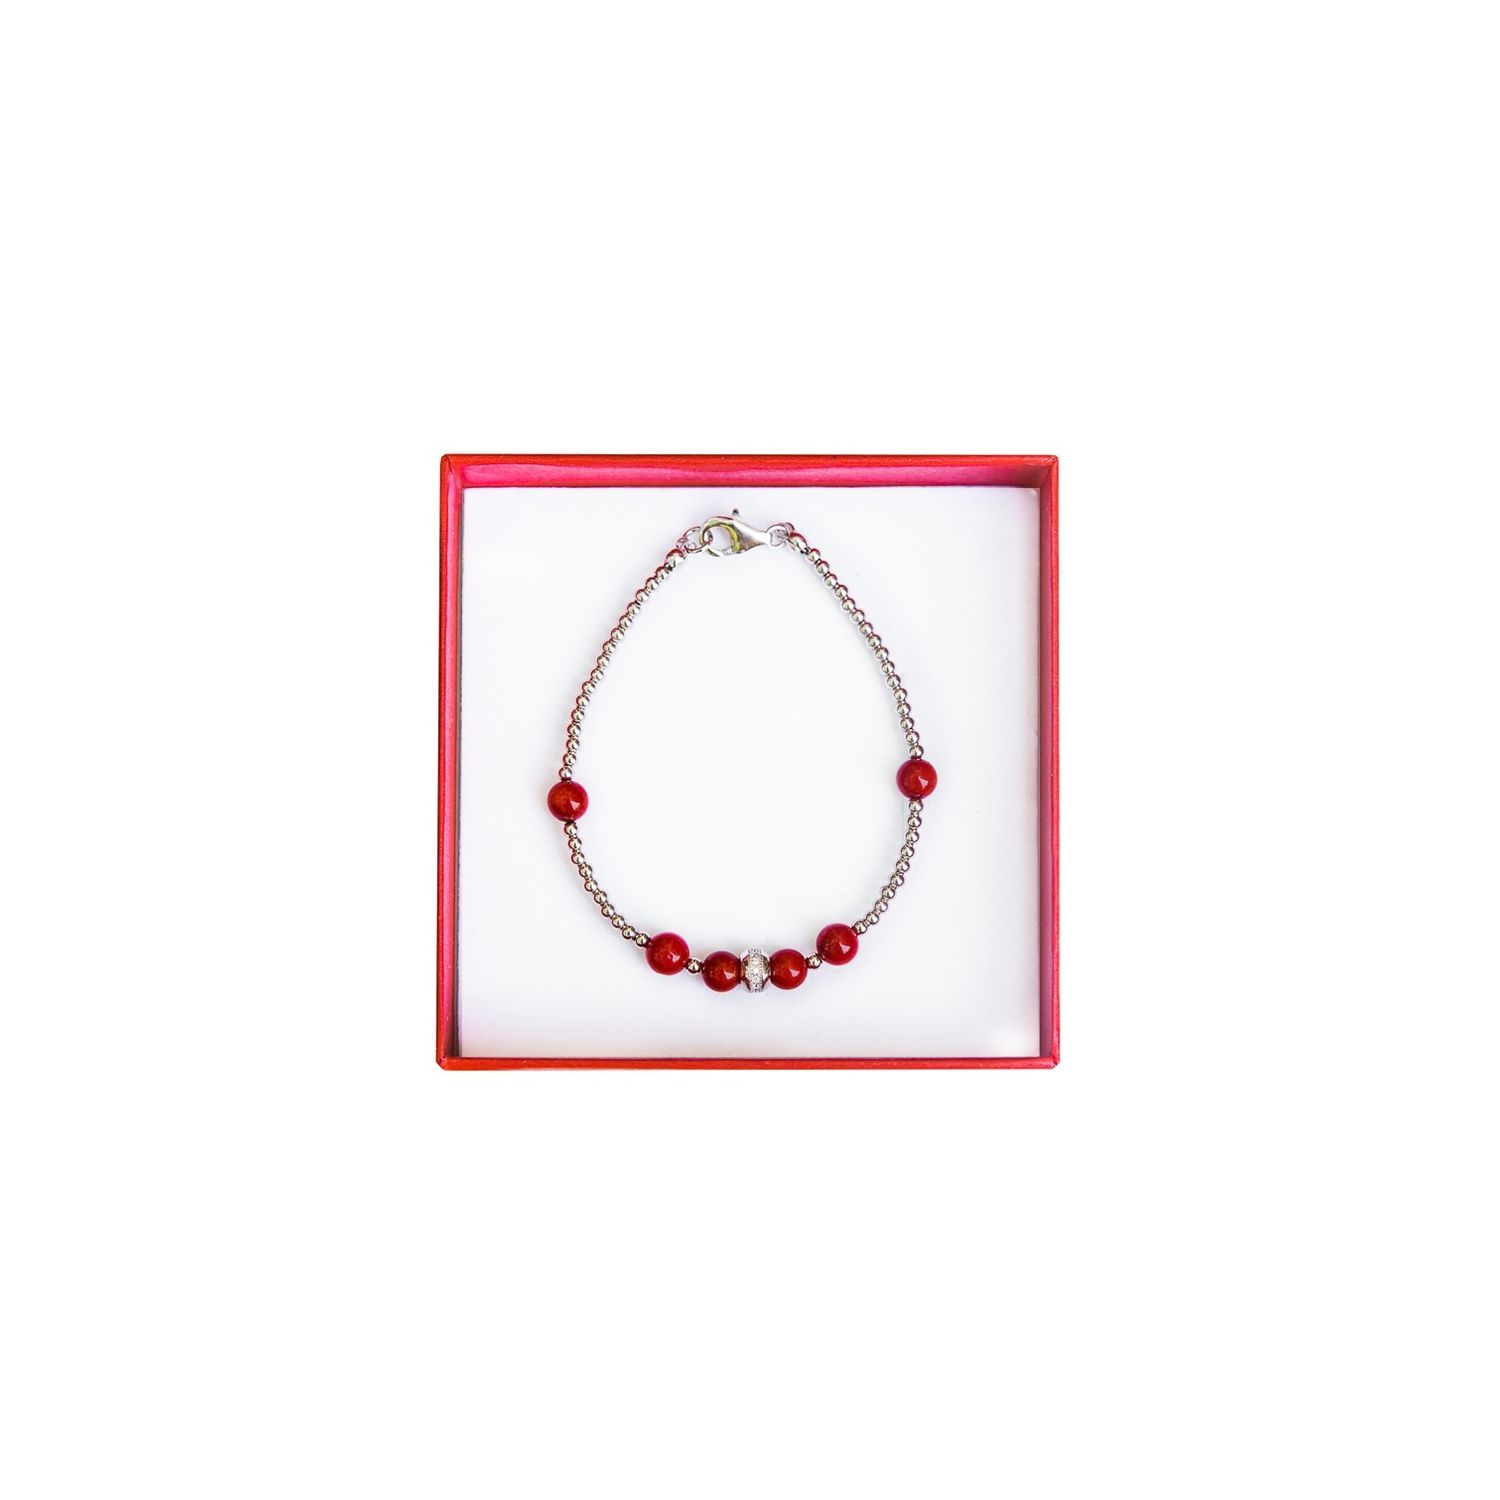 Irresistible silver and red coral bracelet